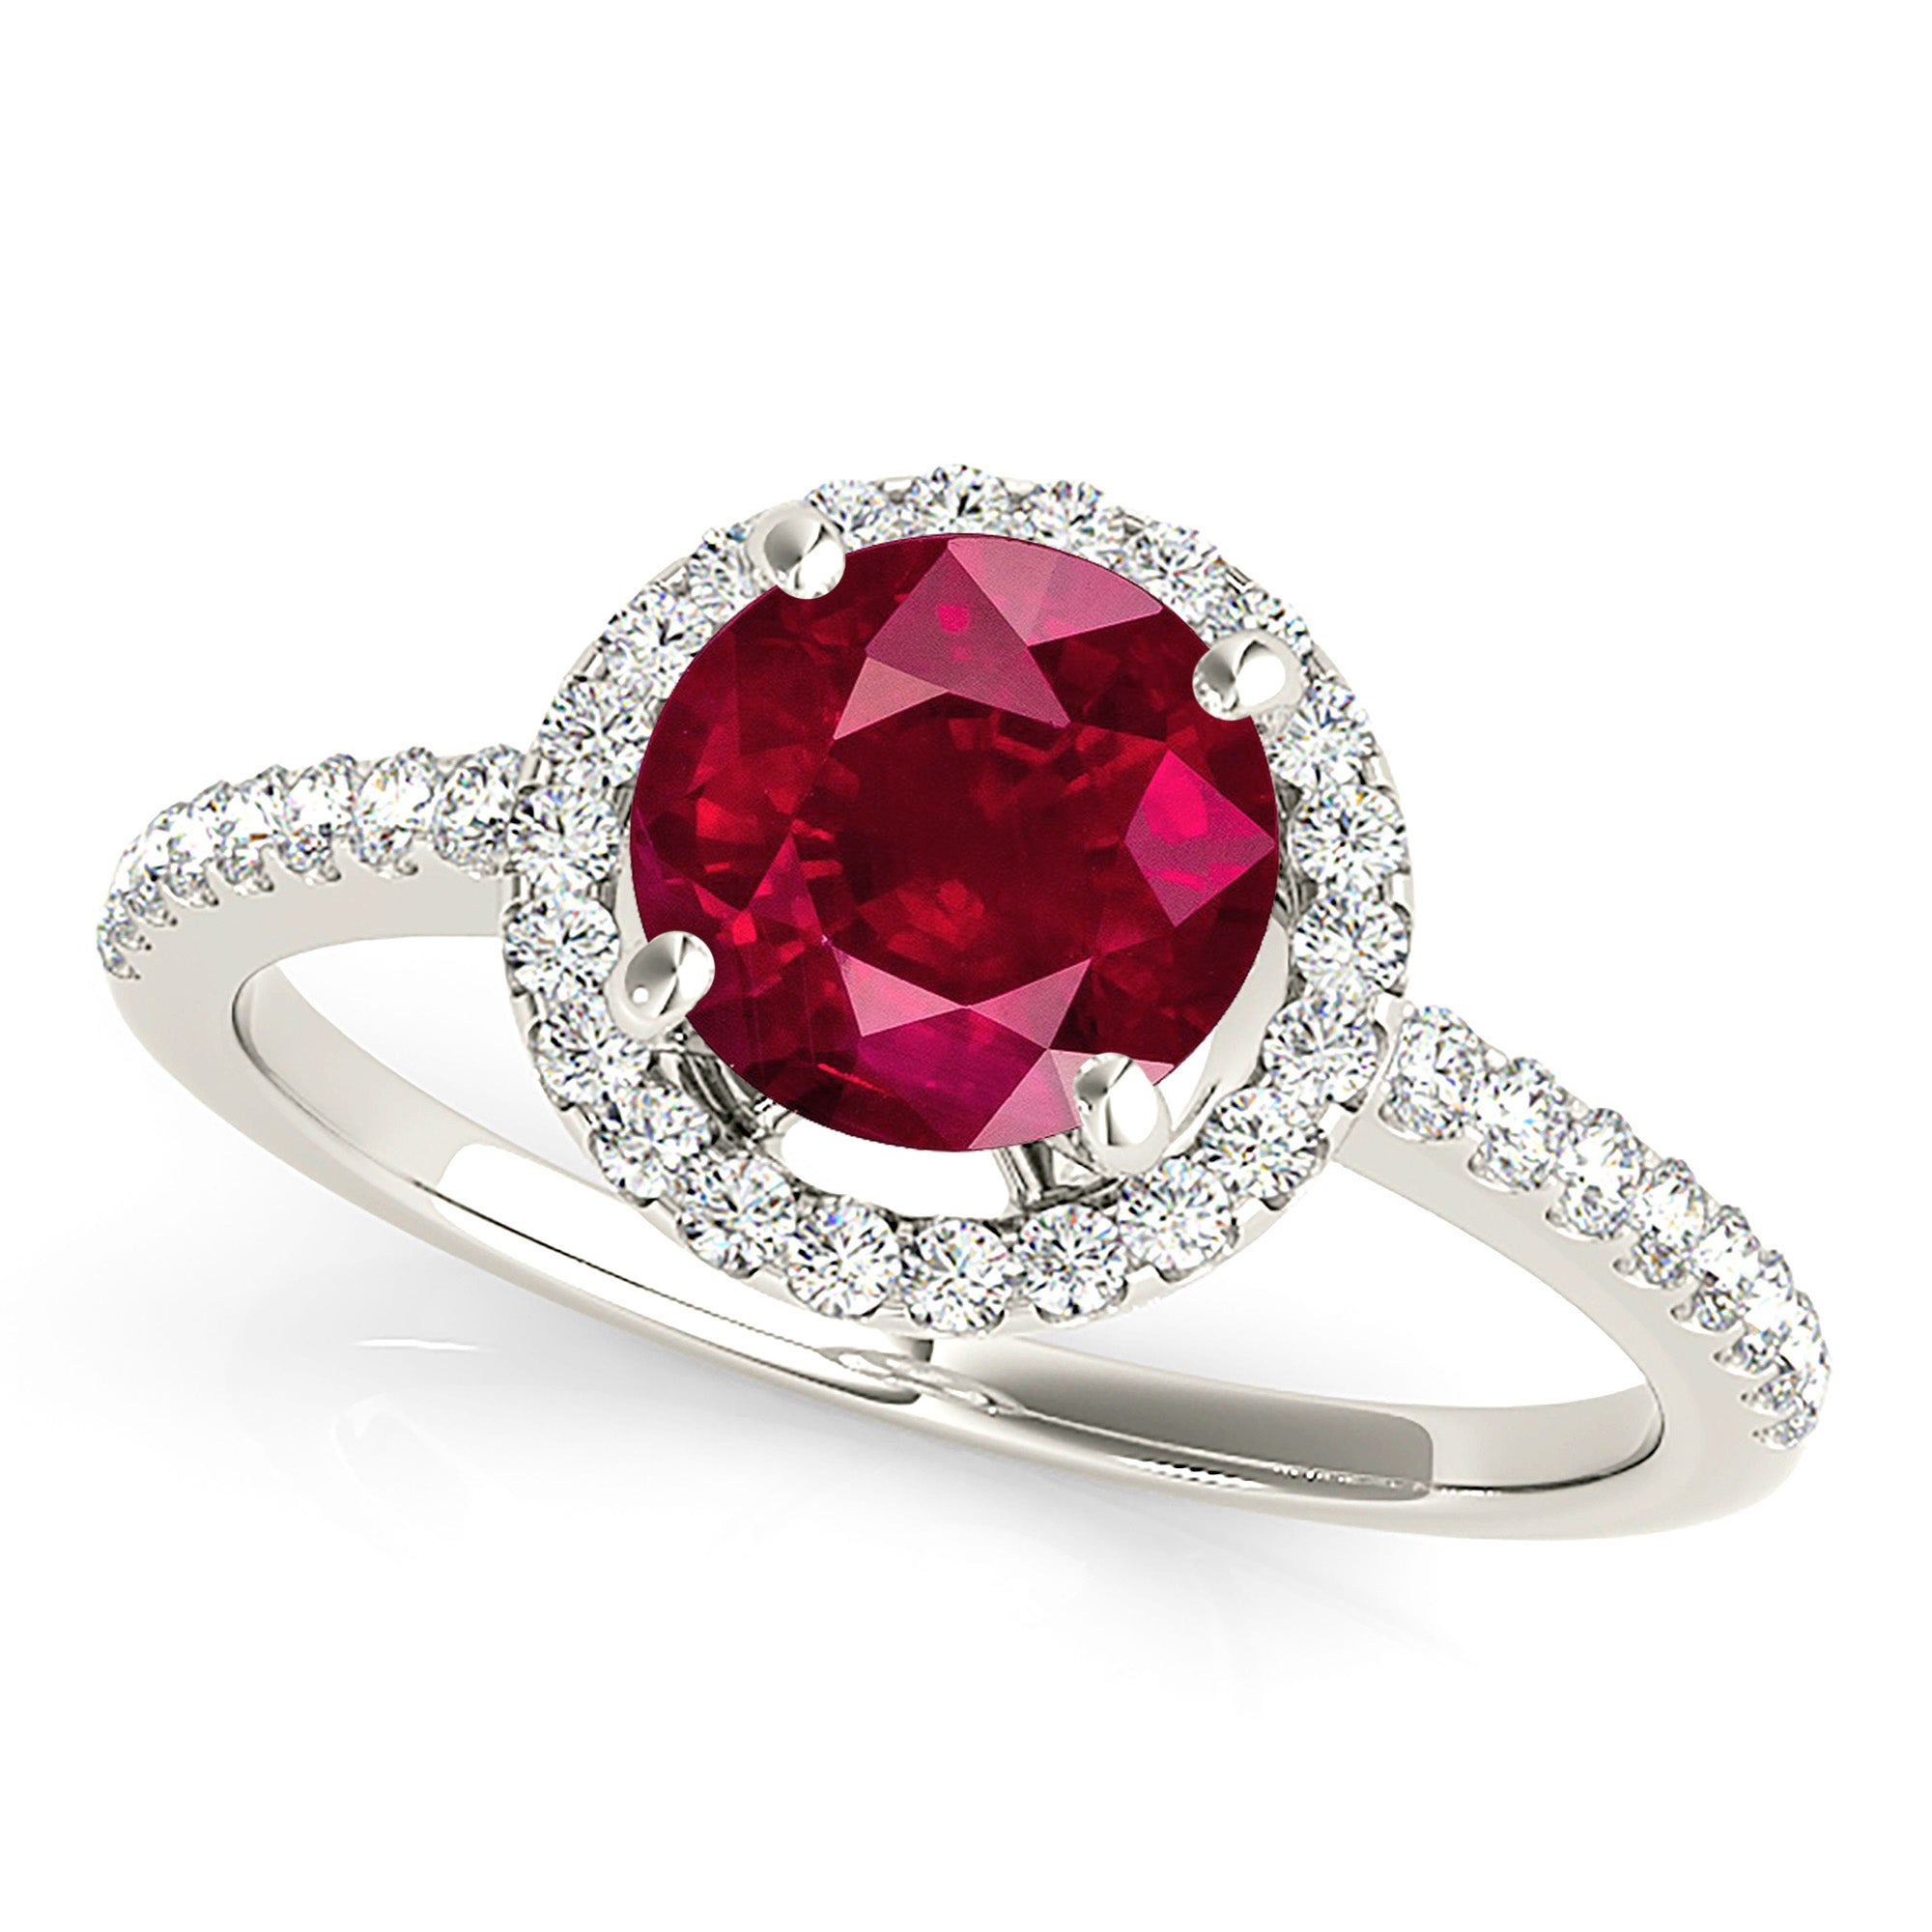 2.35 ct. Genuine Ruby Ring With 0.35 ctw. Diamond Delicate Halo And Thin Band, Elegant Halo Ring-in 14K/18K White, Yellow, Rose Gold and Platinum - Christmas Jewelry Gift -VIRABYANI